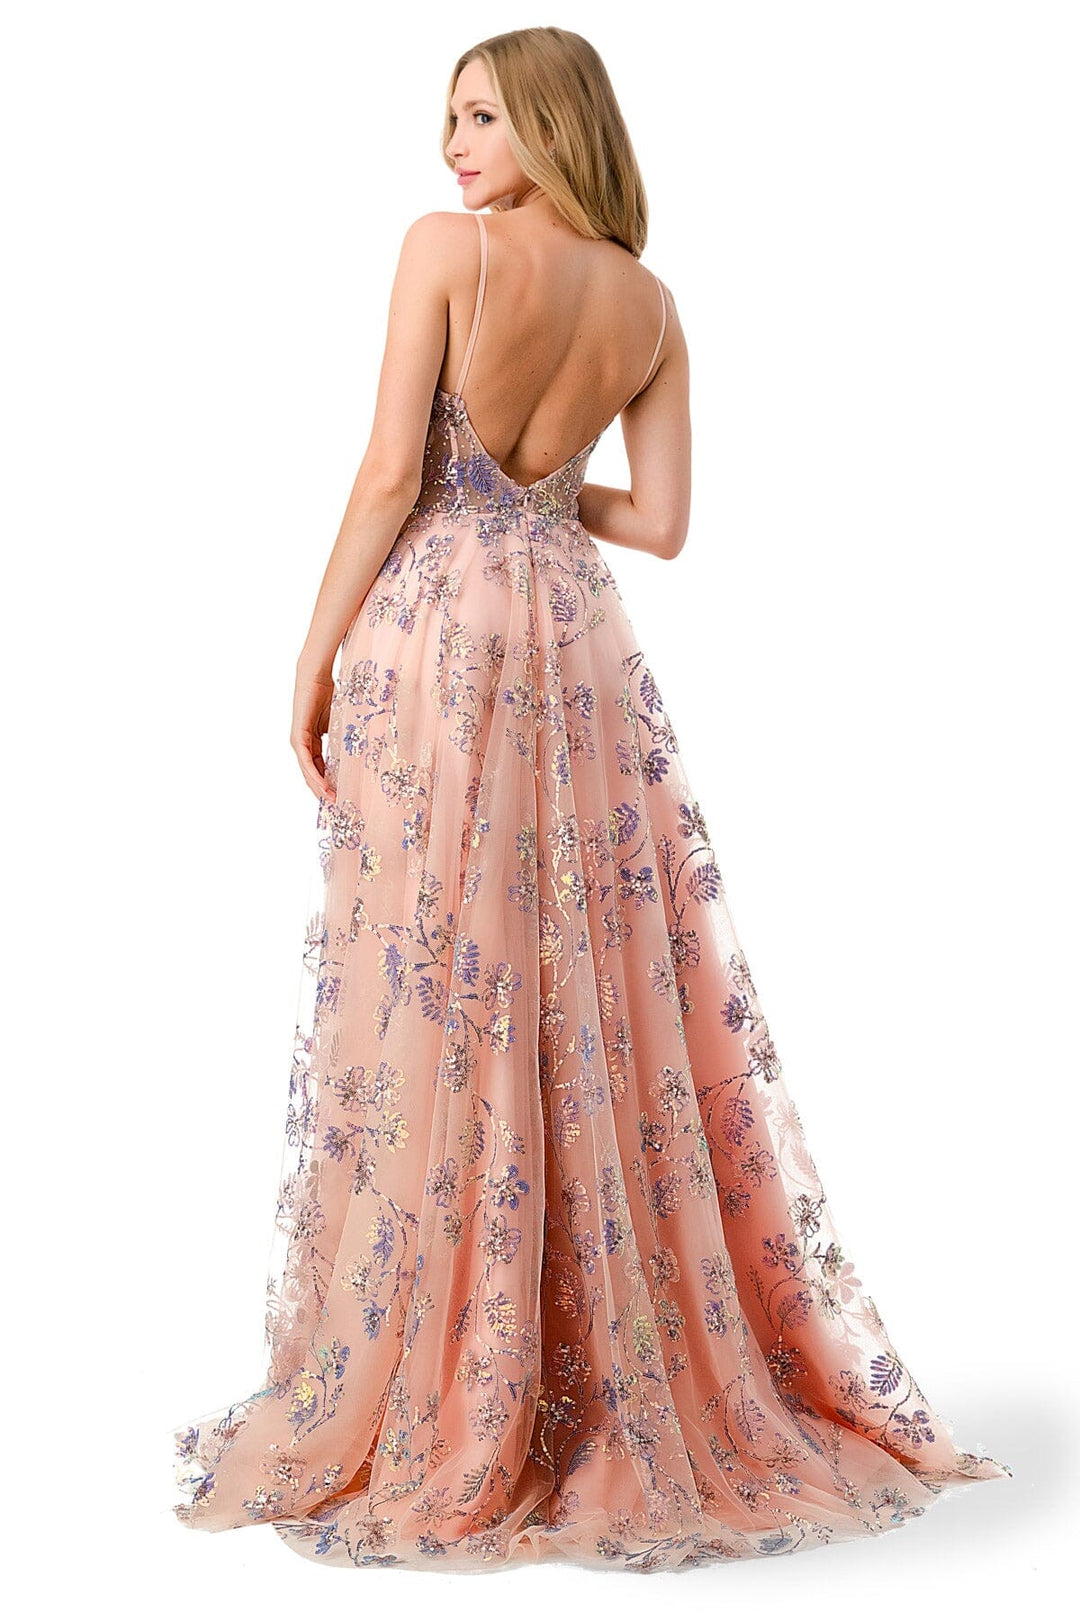 Floral Embroidered Sleeveless A-Line Gown by Coya L2794T